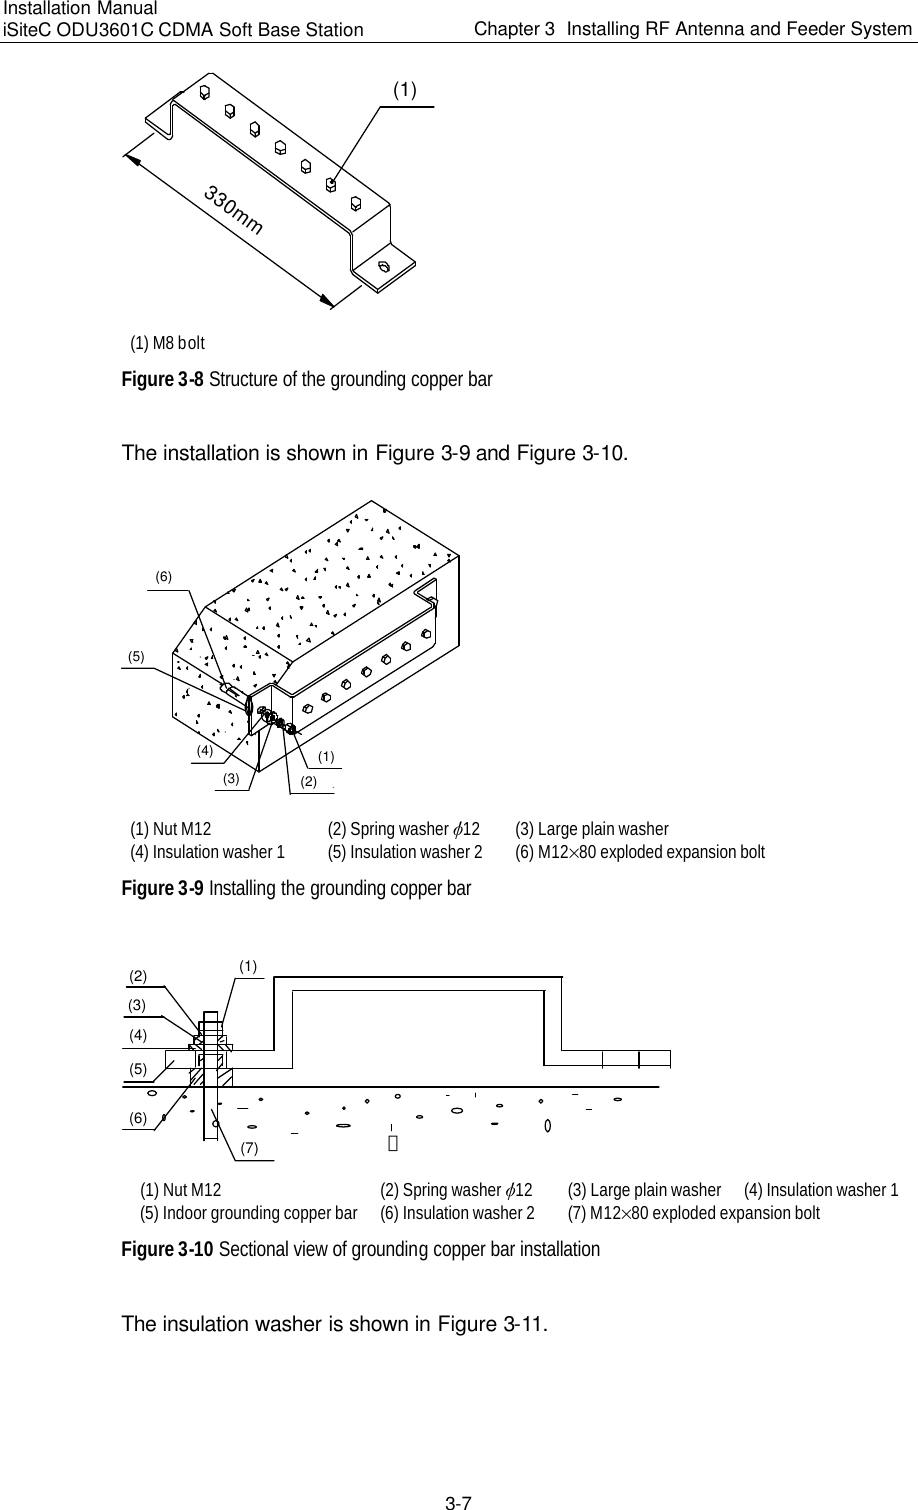 Installation Manual   iSiteC ODU3601C CDMA Soft Base Station Chapter 3  Installing RF Antenna and Feeder System  3-7 (1)330mm (1) M8 bolt Figure 3-8 Structure of the grounding copper bar　The installation is shown in Figure 3-9 and Figure 3-10. (1)(2)(3)(4)(5)(6) (1) Nut M12 (2) Spring washer v12 (3) Large plain washer (4) Insulation washer 1 (5) Insulation washer 2 (6) M12%80 exploded expansion bolt Figure 3-9 Installing the grounding copper bar (1)(2)(3)(4)(6)(7) 墙(5) (1) Nut M12 (2) Spring washer v12 (3) Large plain washer (4) Insulation washer 1  (5) Indoor grounding copper bar (6) Insulation washer 2 (7) M12%80 exploded expansion bolt Figure 3-10 Sectional view of grounding copper bar installation The insulation washer is shown in Figure 3-11. 